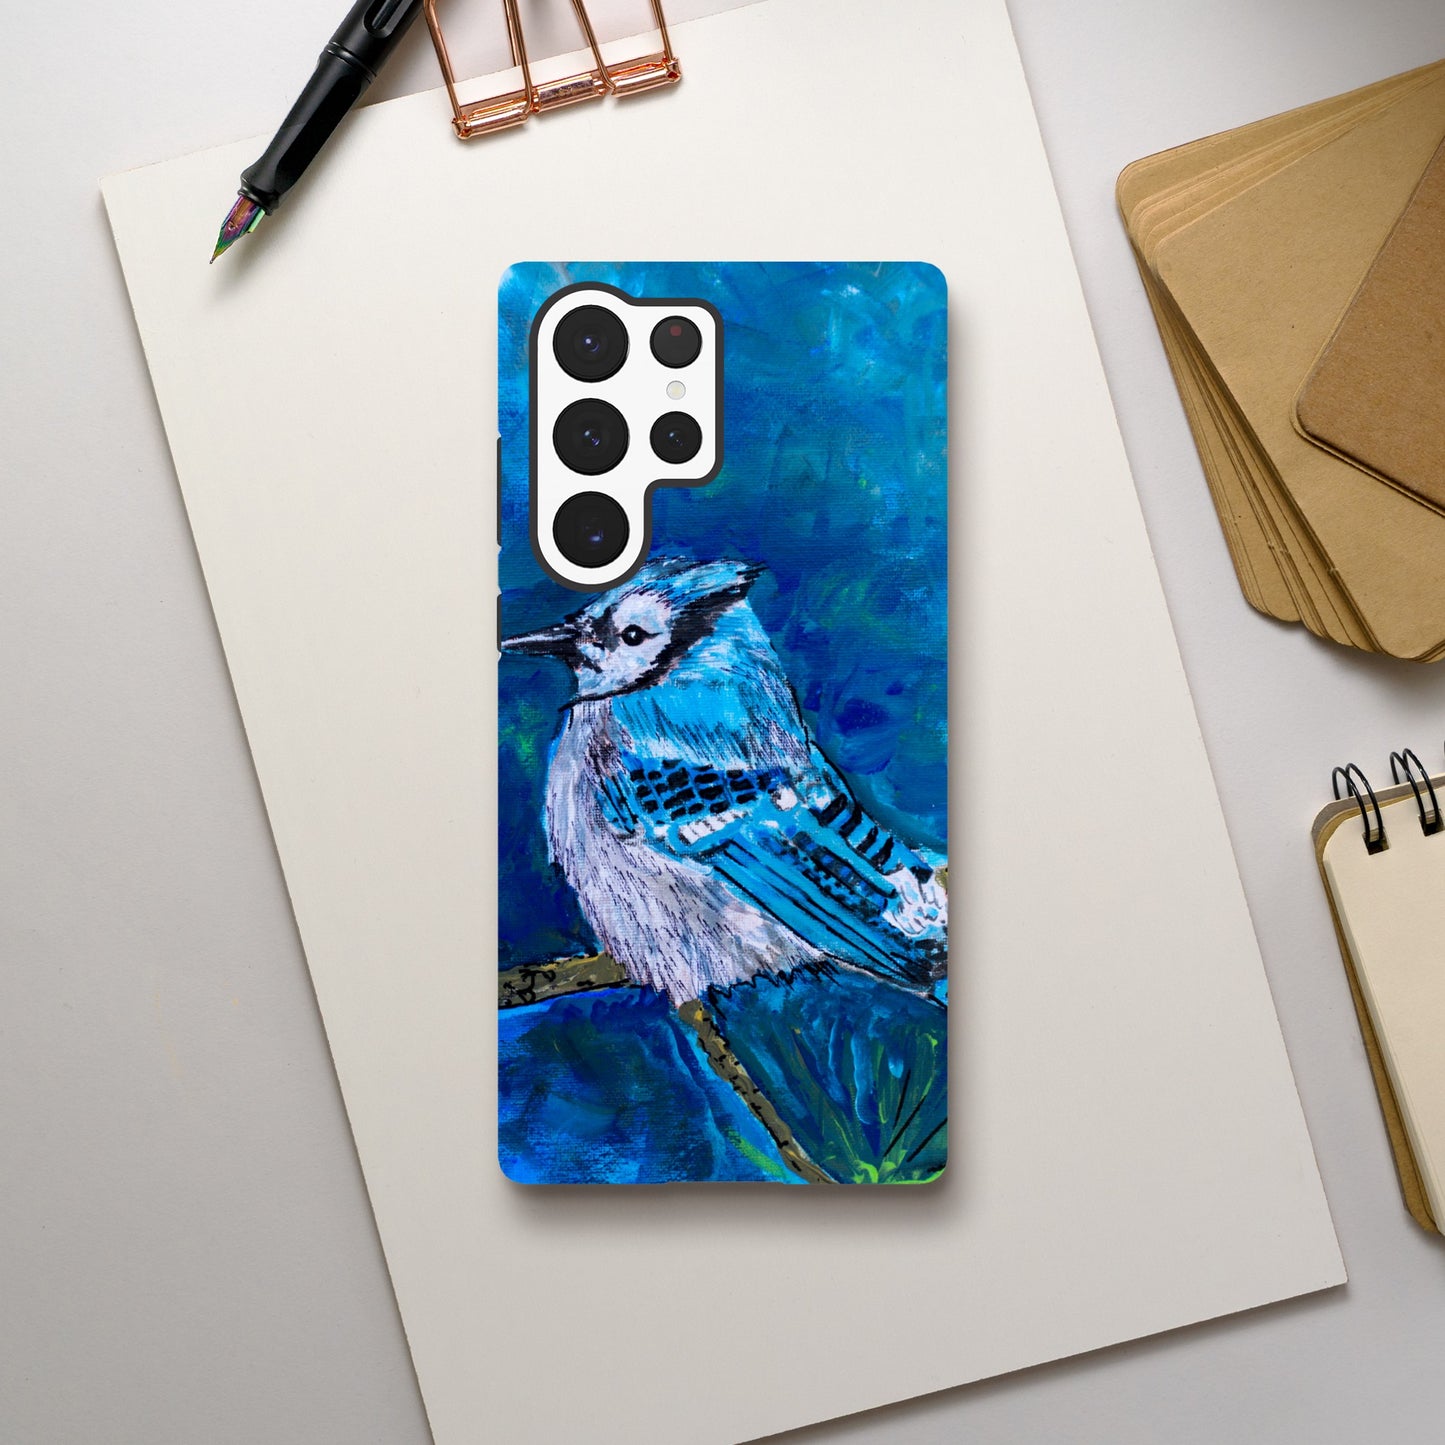 Blue Jay #1 - Phone cases